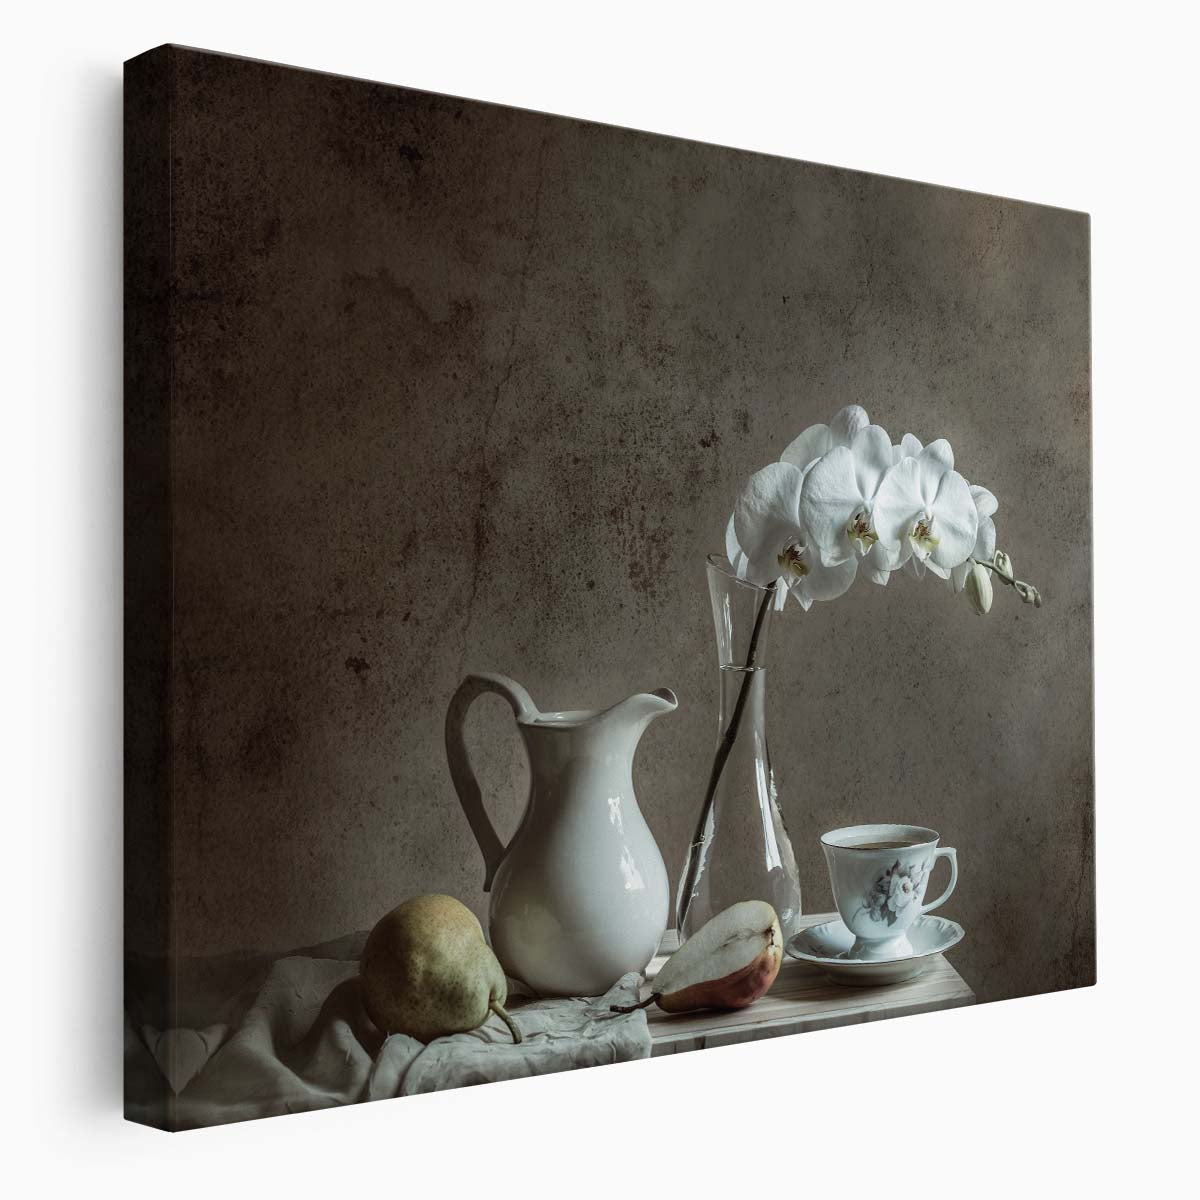 Orchid & Pear Still Life Floral Kitchen Wall Art by Luxuriance Designs. Made in USA.